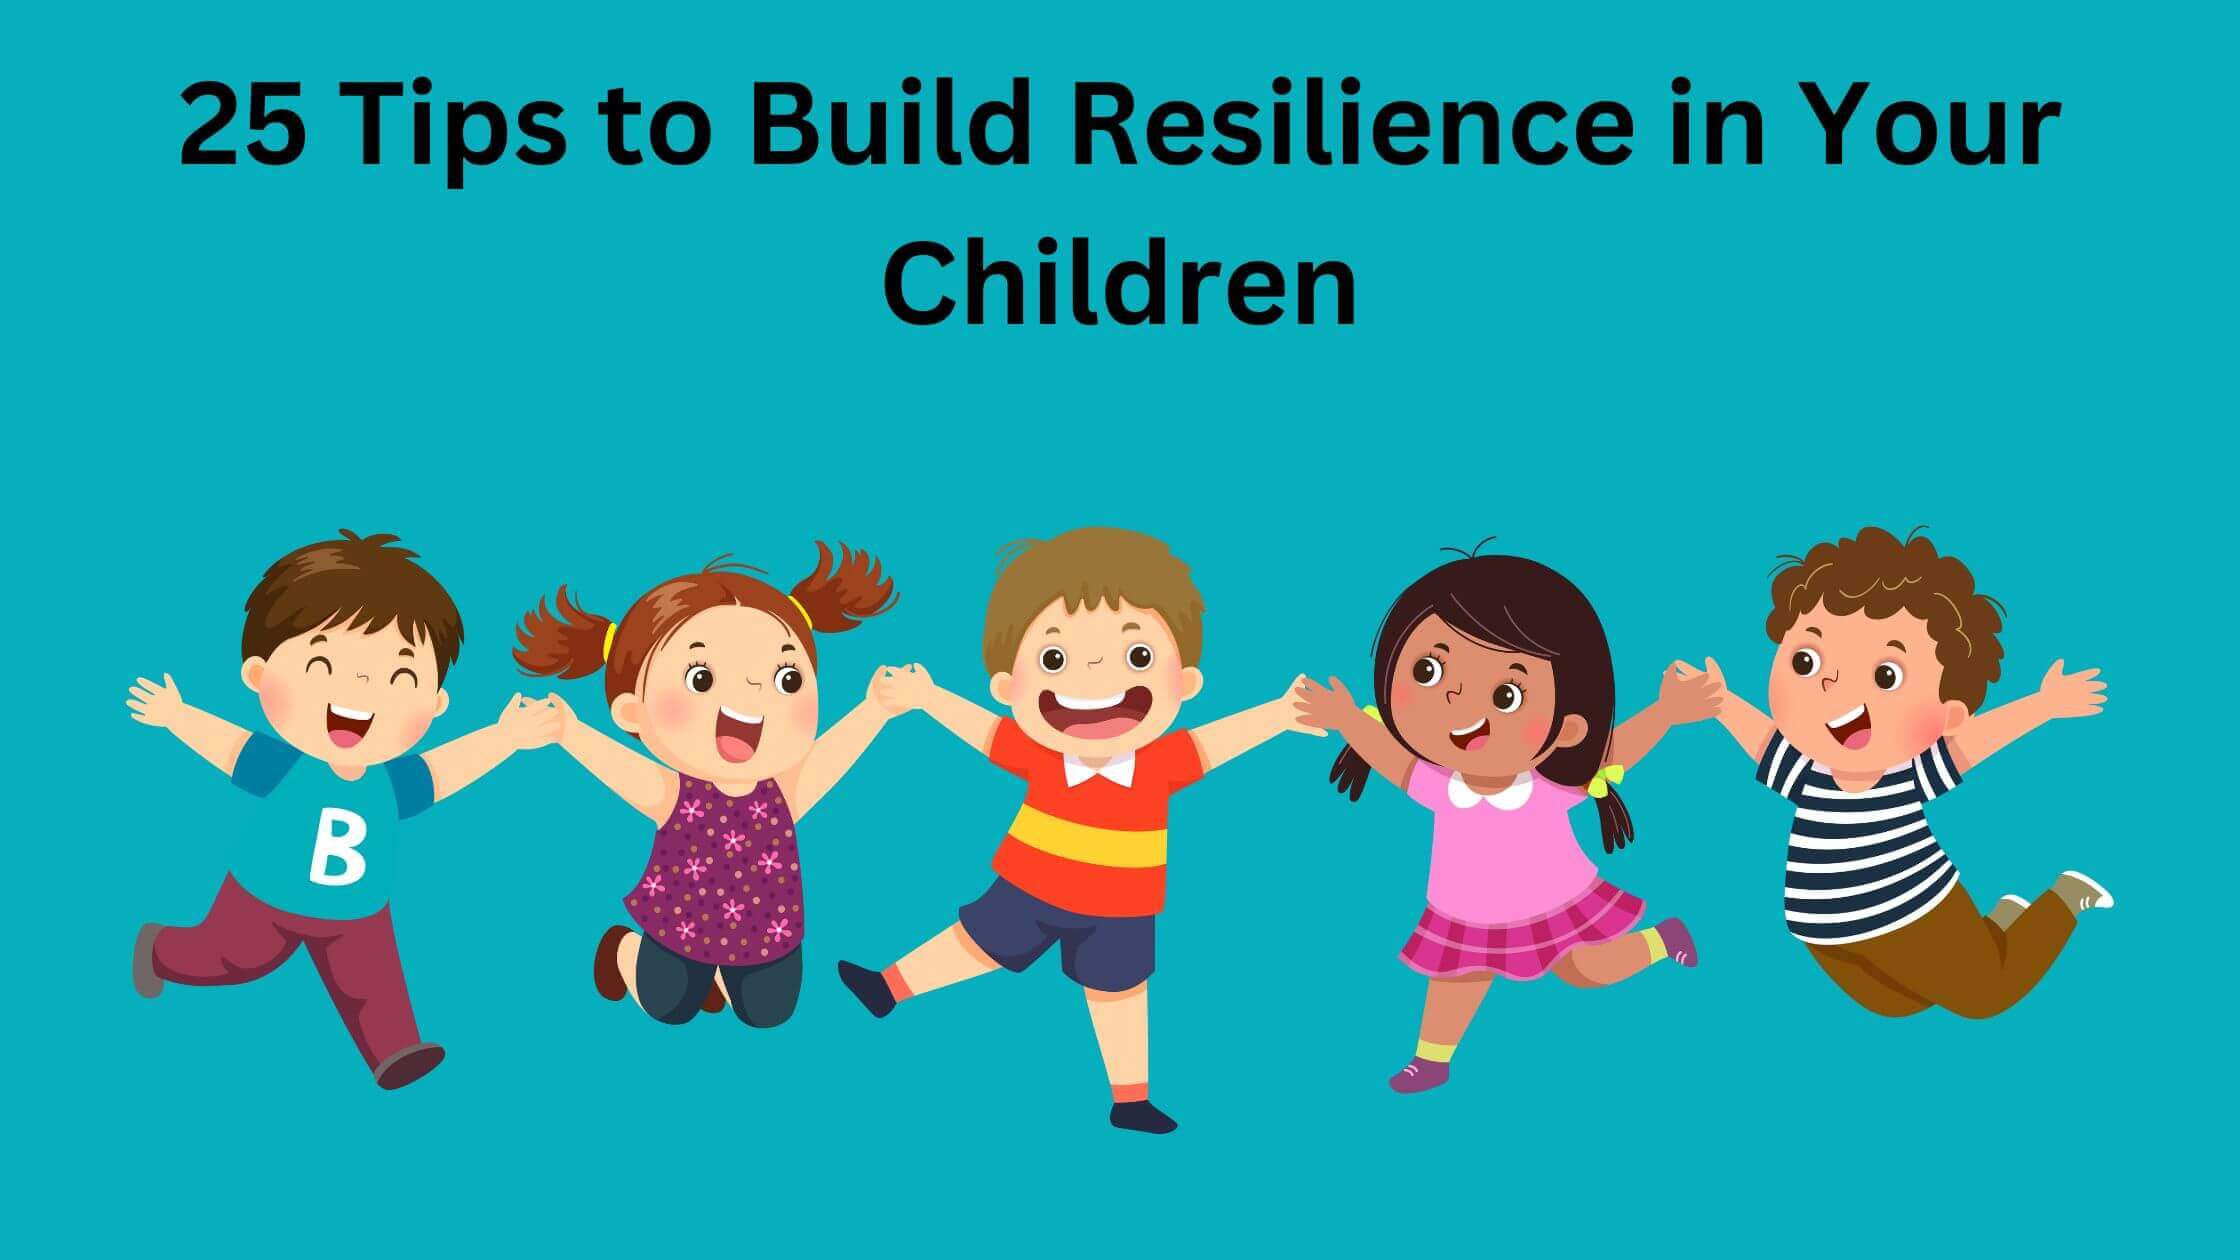 How to Build Resilience in Your Children